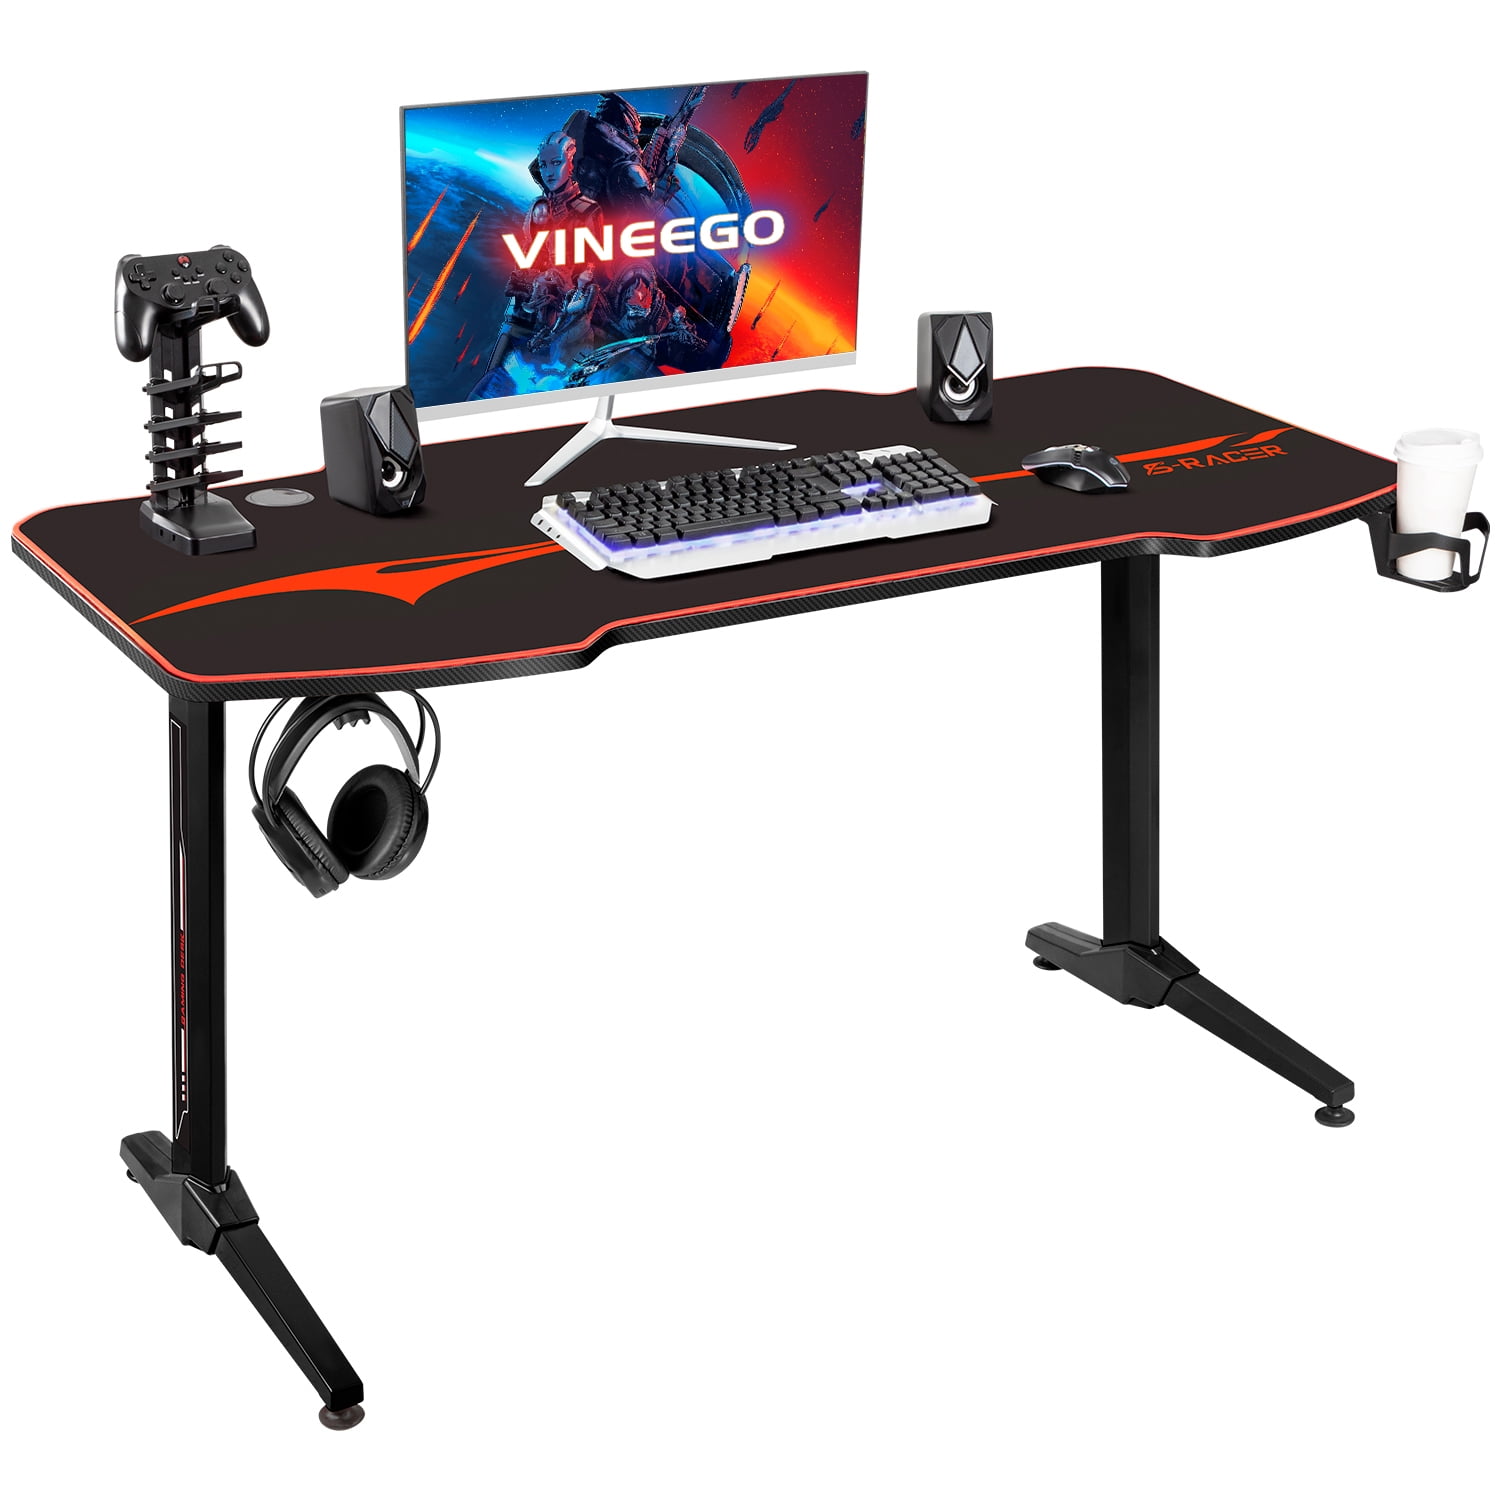 Vineego 55 inch Large Surface T-Shaped Legs Gaming Desk with Free Mouse Pad, Gaming Handle Rack, Cup Holder & Headphone Hook